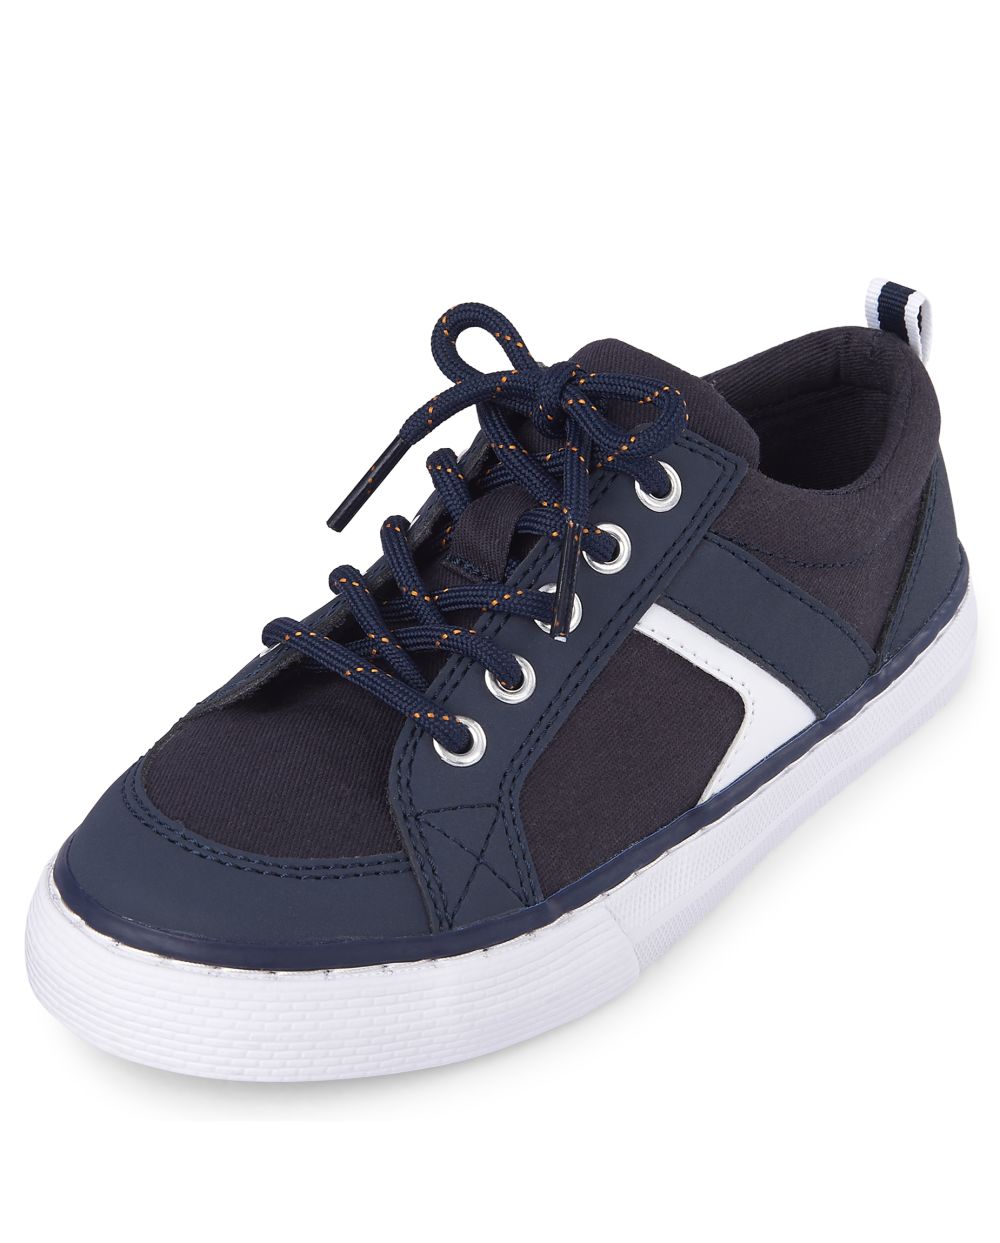 Boys Lace Up Faux Leather Low Top Sneakers